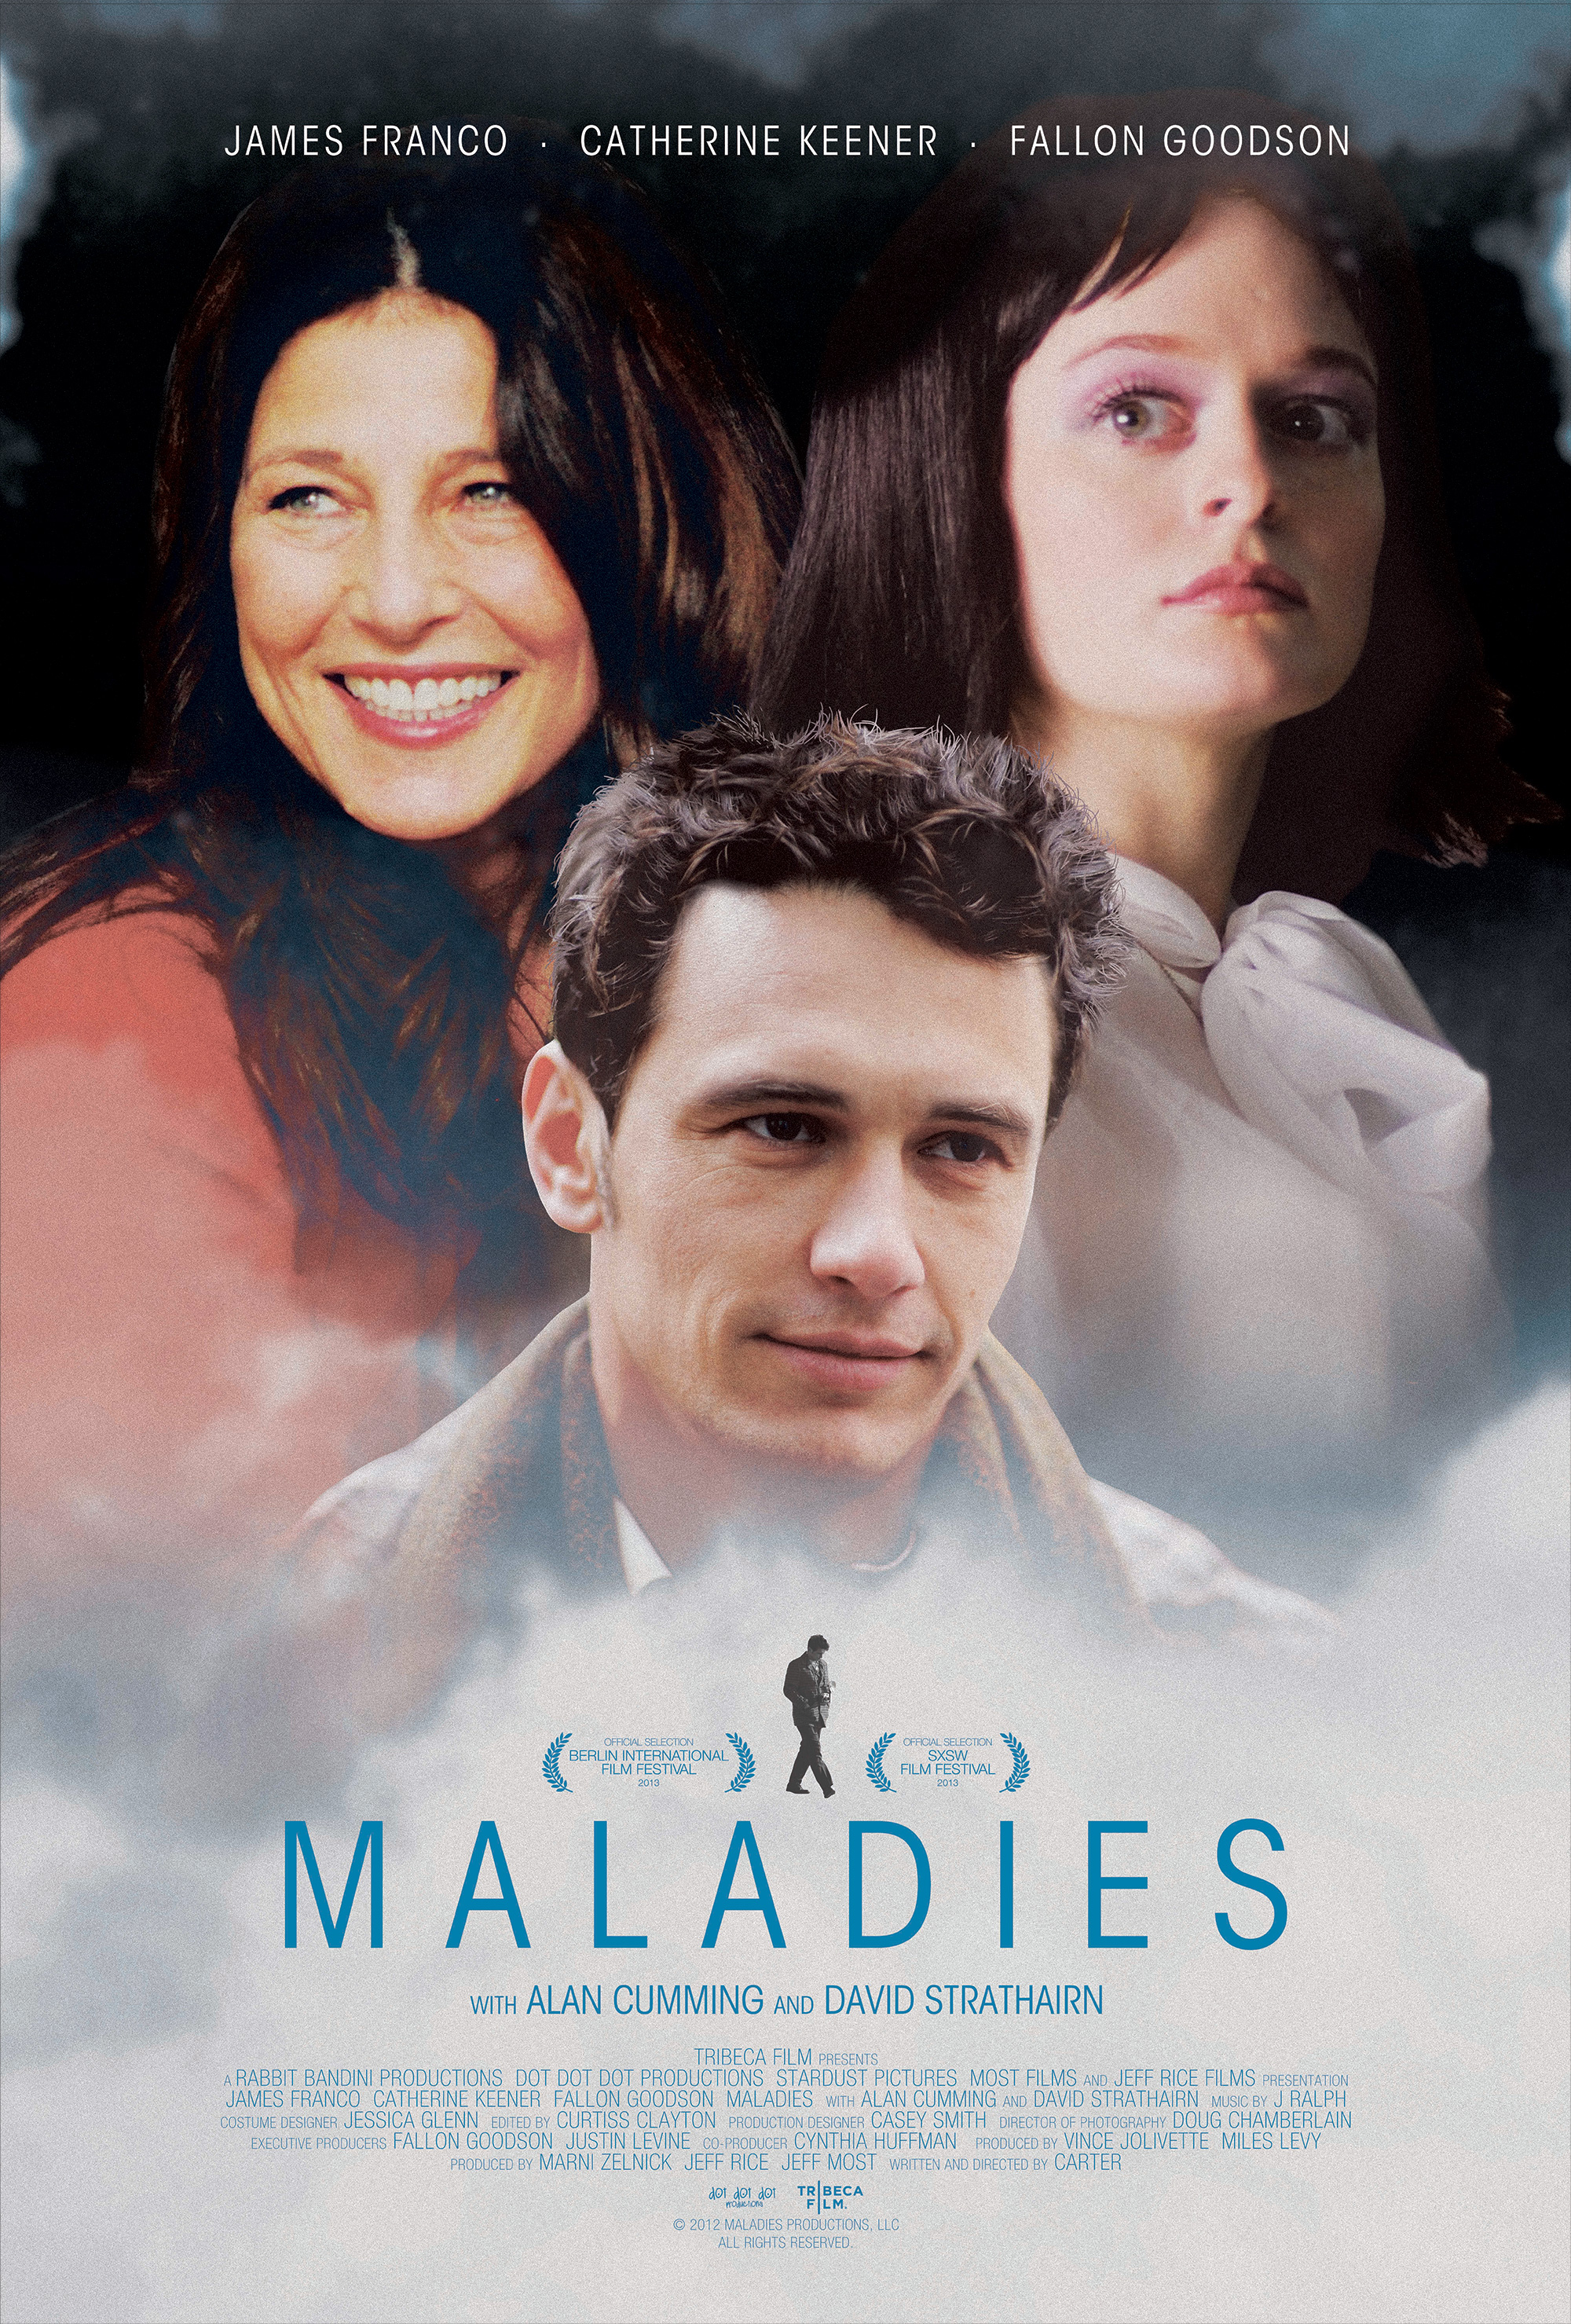 Catherine Keener, James Franco and Fallon Goodson in Maladies (2012)